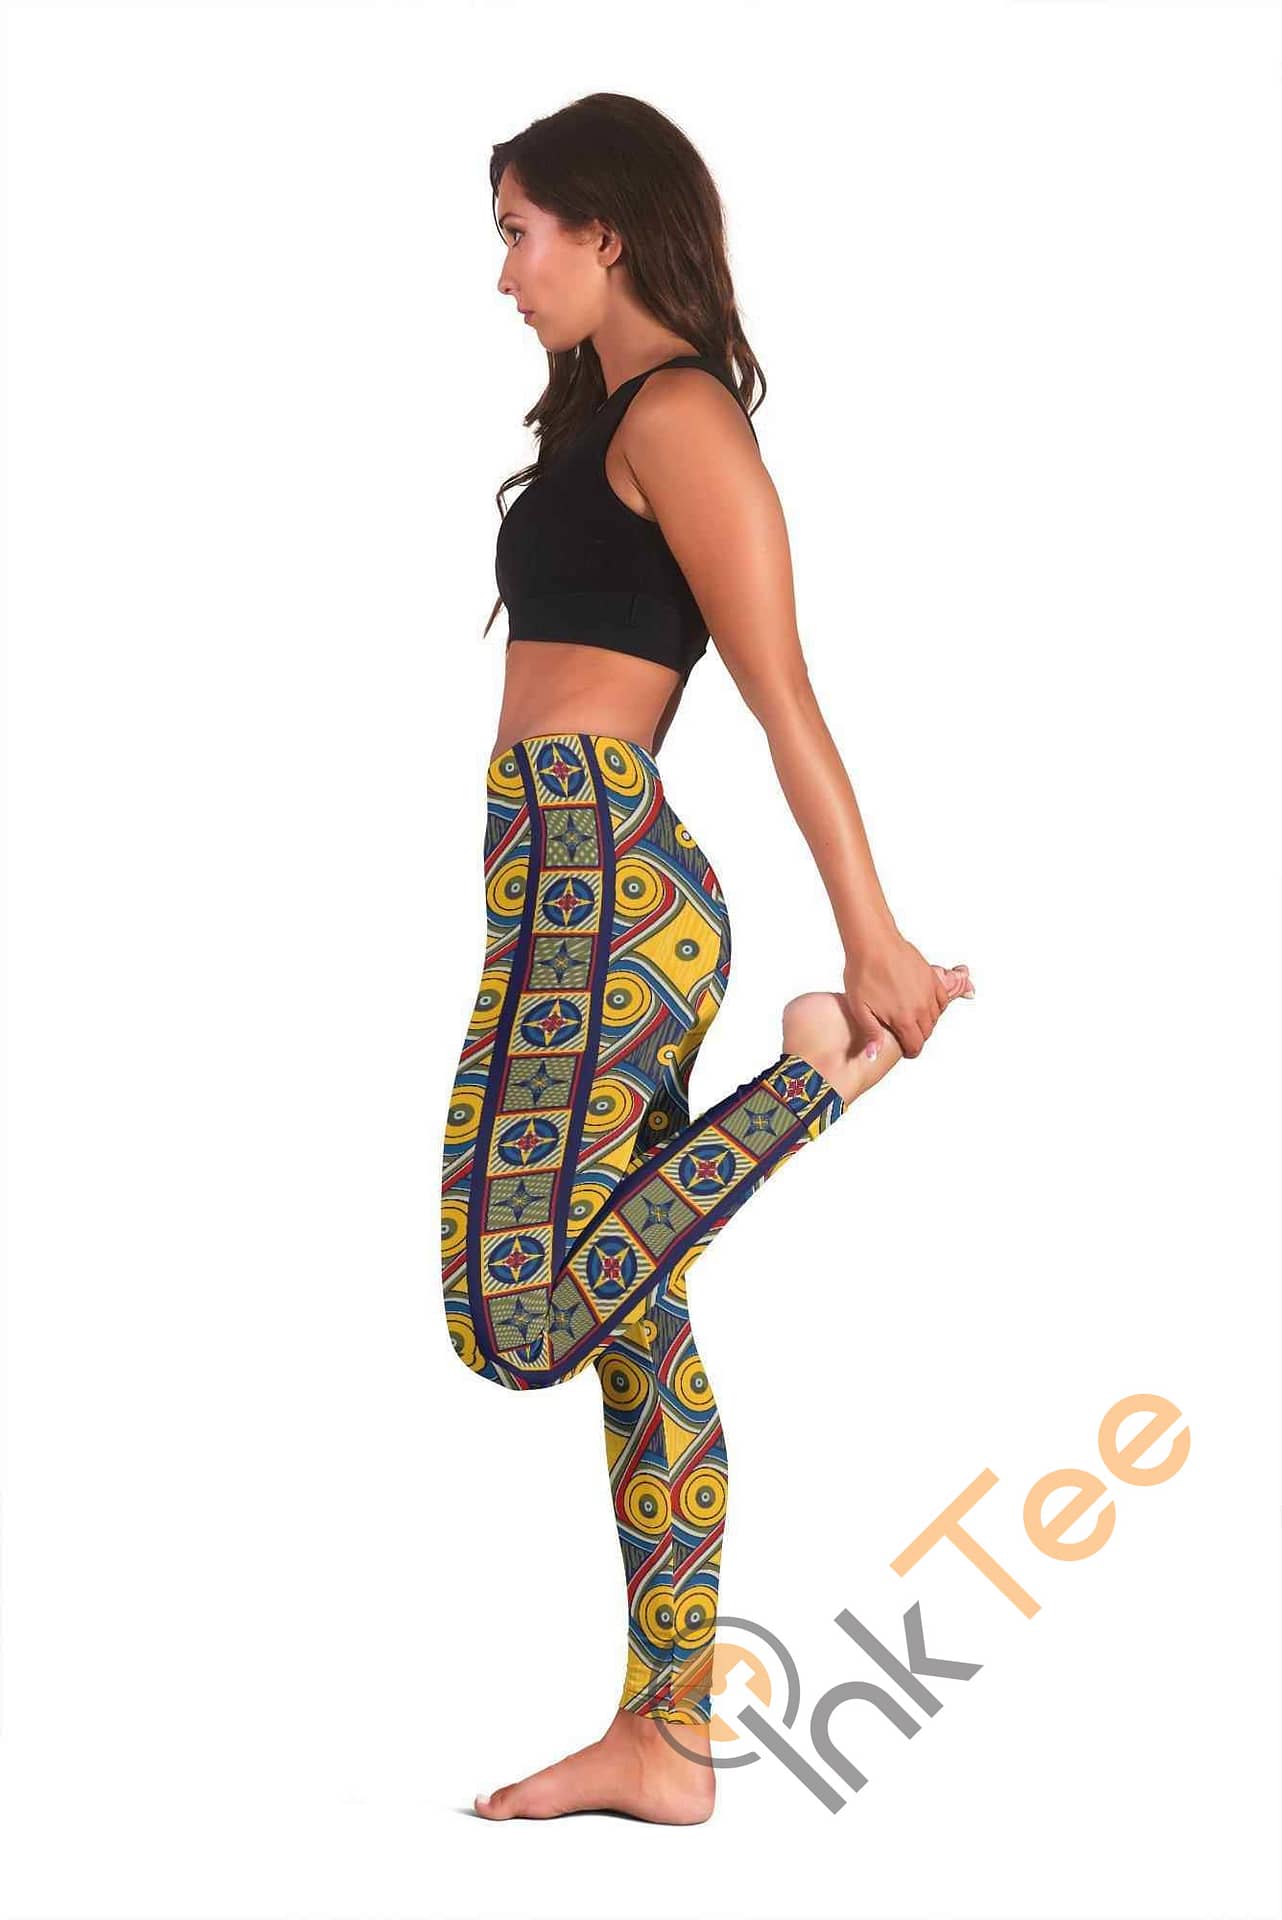 Inktee Store - My Happy Place Gallifrey One High Waist Fashion Yoga Fitness 3D All Over Print For Yoga Fitness Legging Image